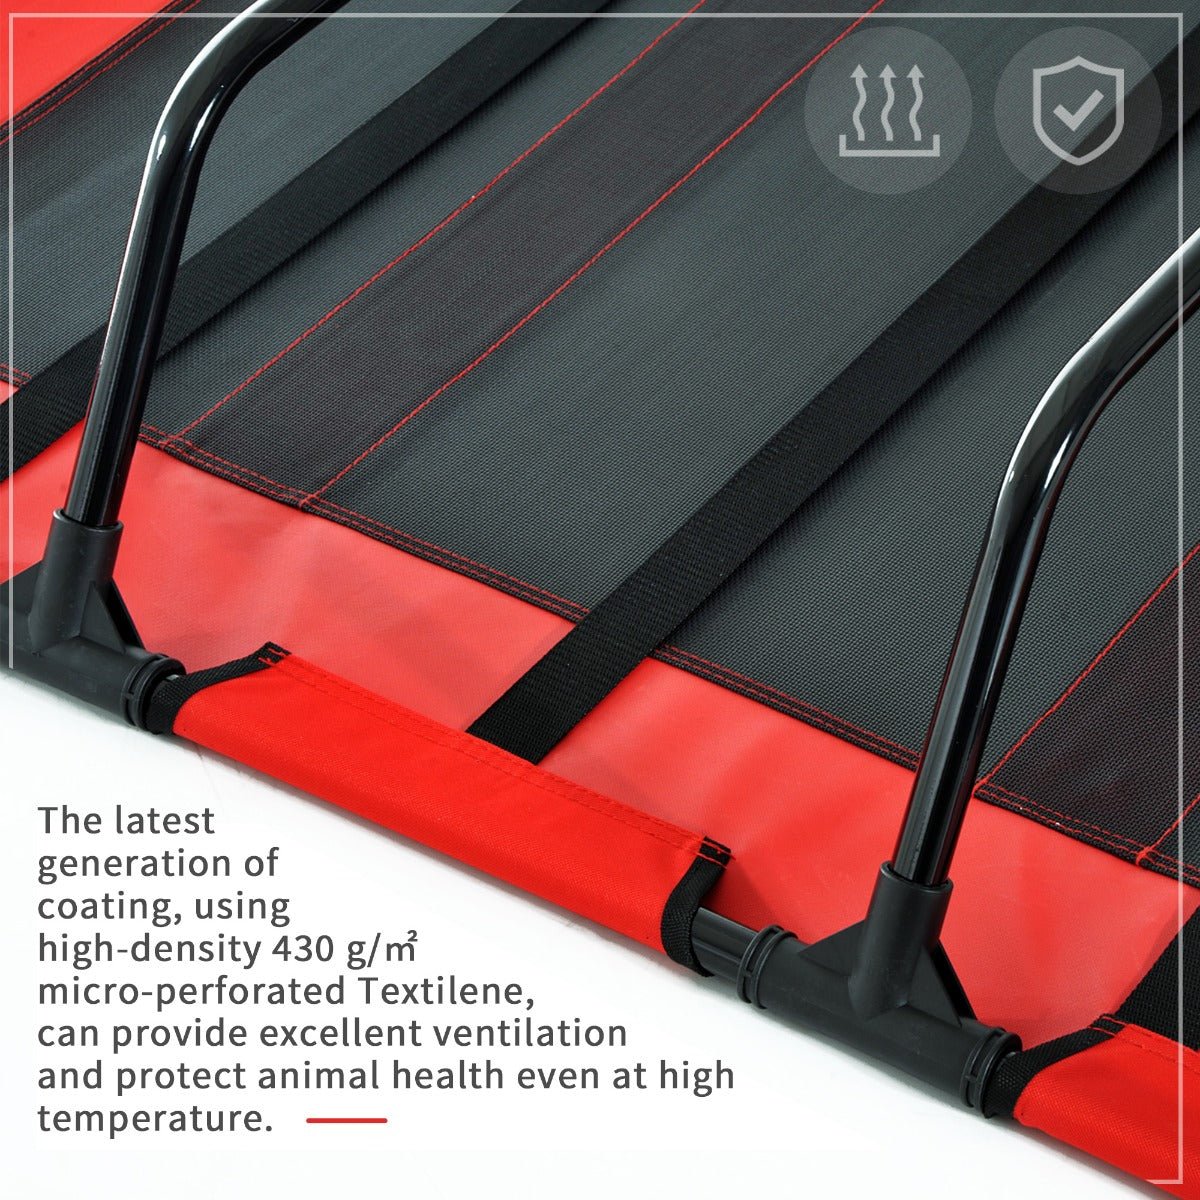 -PawHut Metal Frame Elevated Folding Pet Bed Dog Cot Camping Sleeper Cooling Summer Pet Bed 48" x 46", Red - Outdoor Style Company